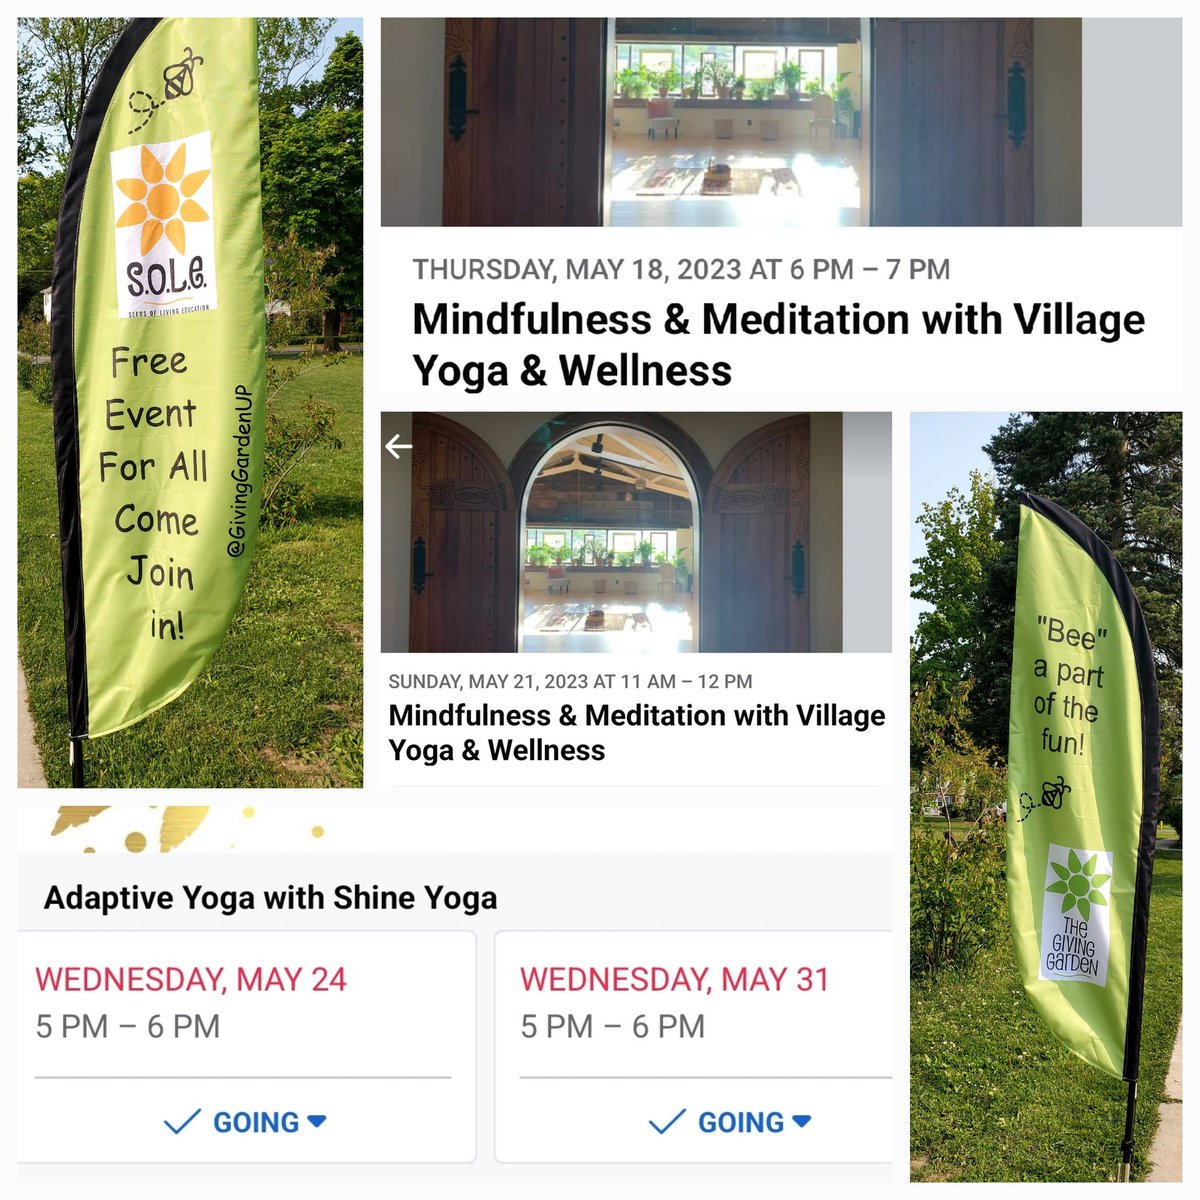 Free for all Wednesdays w/ @ShineYogaWNY at 5pm @ Village Community Garden (Prospect Ave by the Playground), Thursdays at 6pm @villageyoga in the Giving Garden (across from UPES) & Sundays at 11am w/ @villageyogawellness in the Giving Garden! TY @JonRivera149 @NYSOCFS